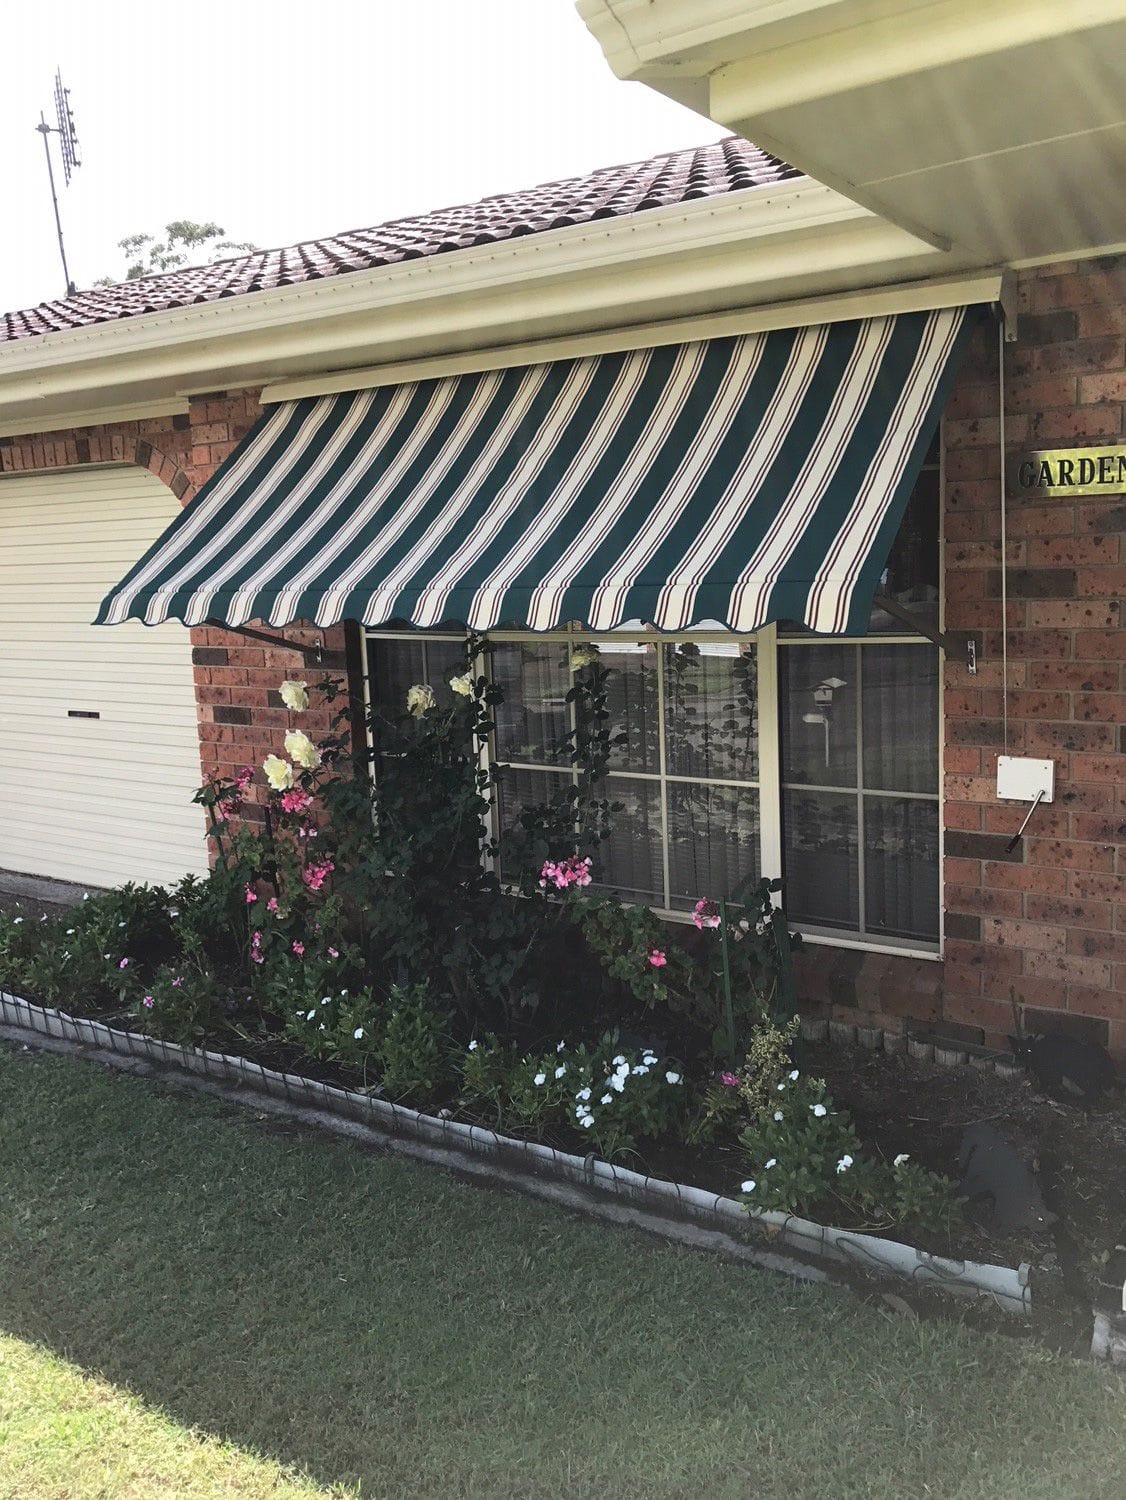 Pivot arm awnings are stylish and practical